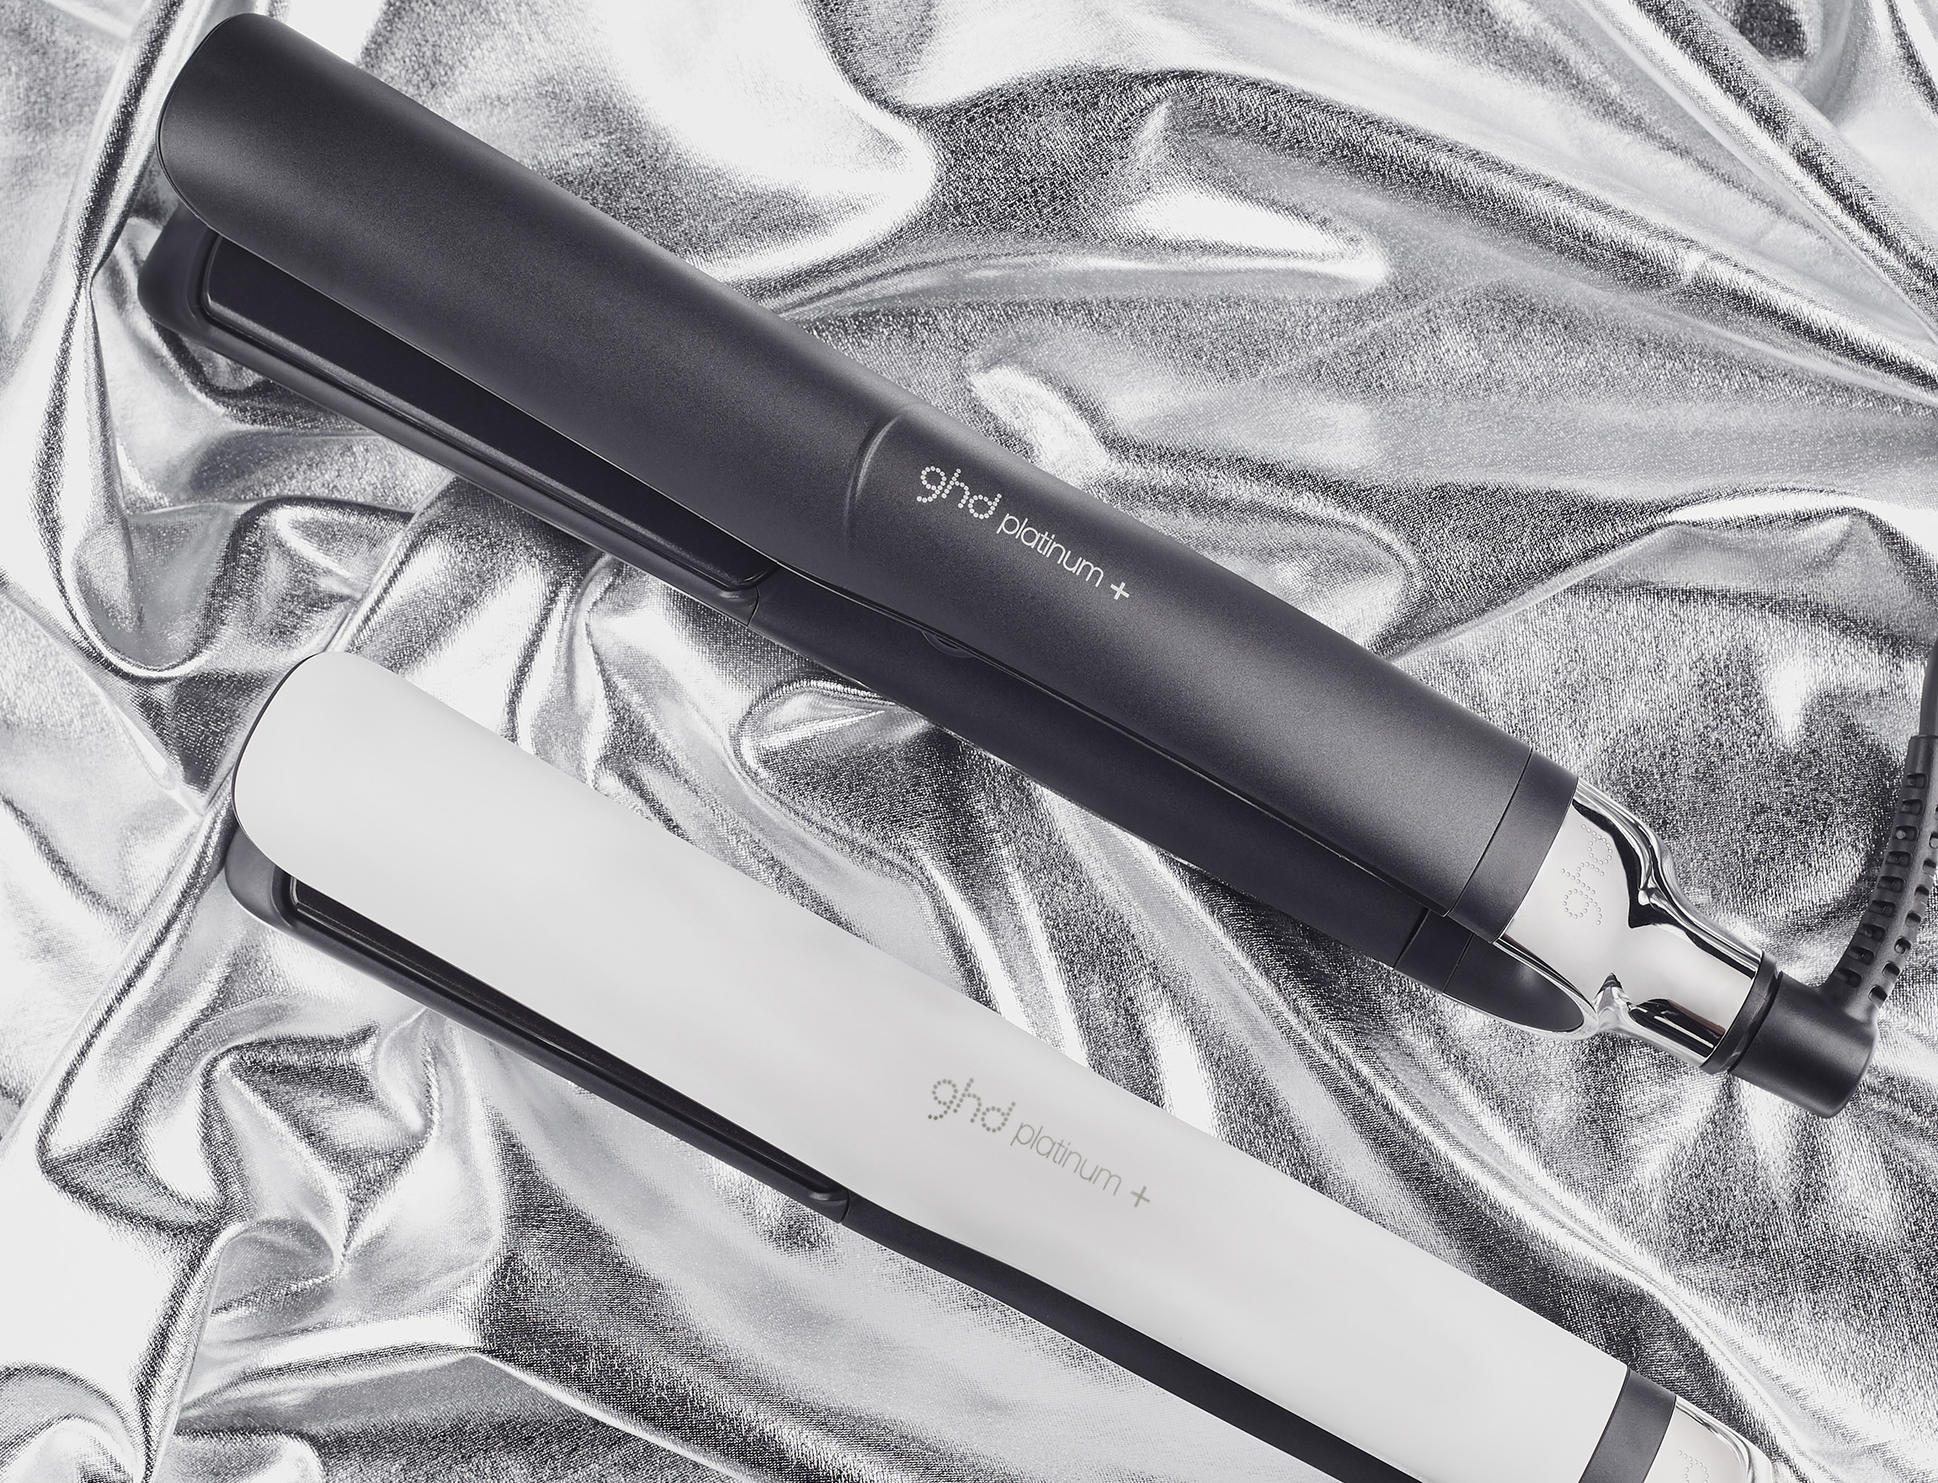 GHD PLATINUM+ PERSONALISED STYLING IN BLACK OR WHITE